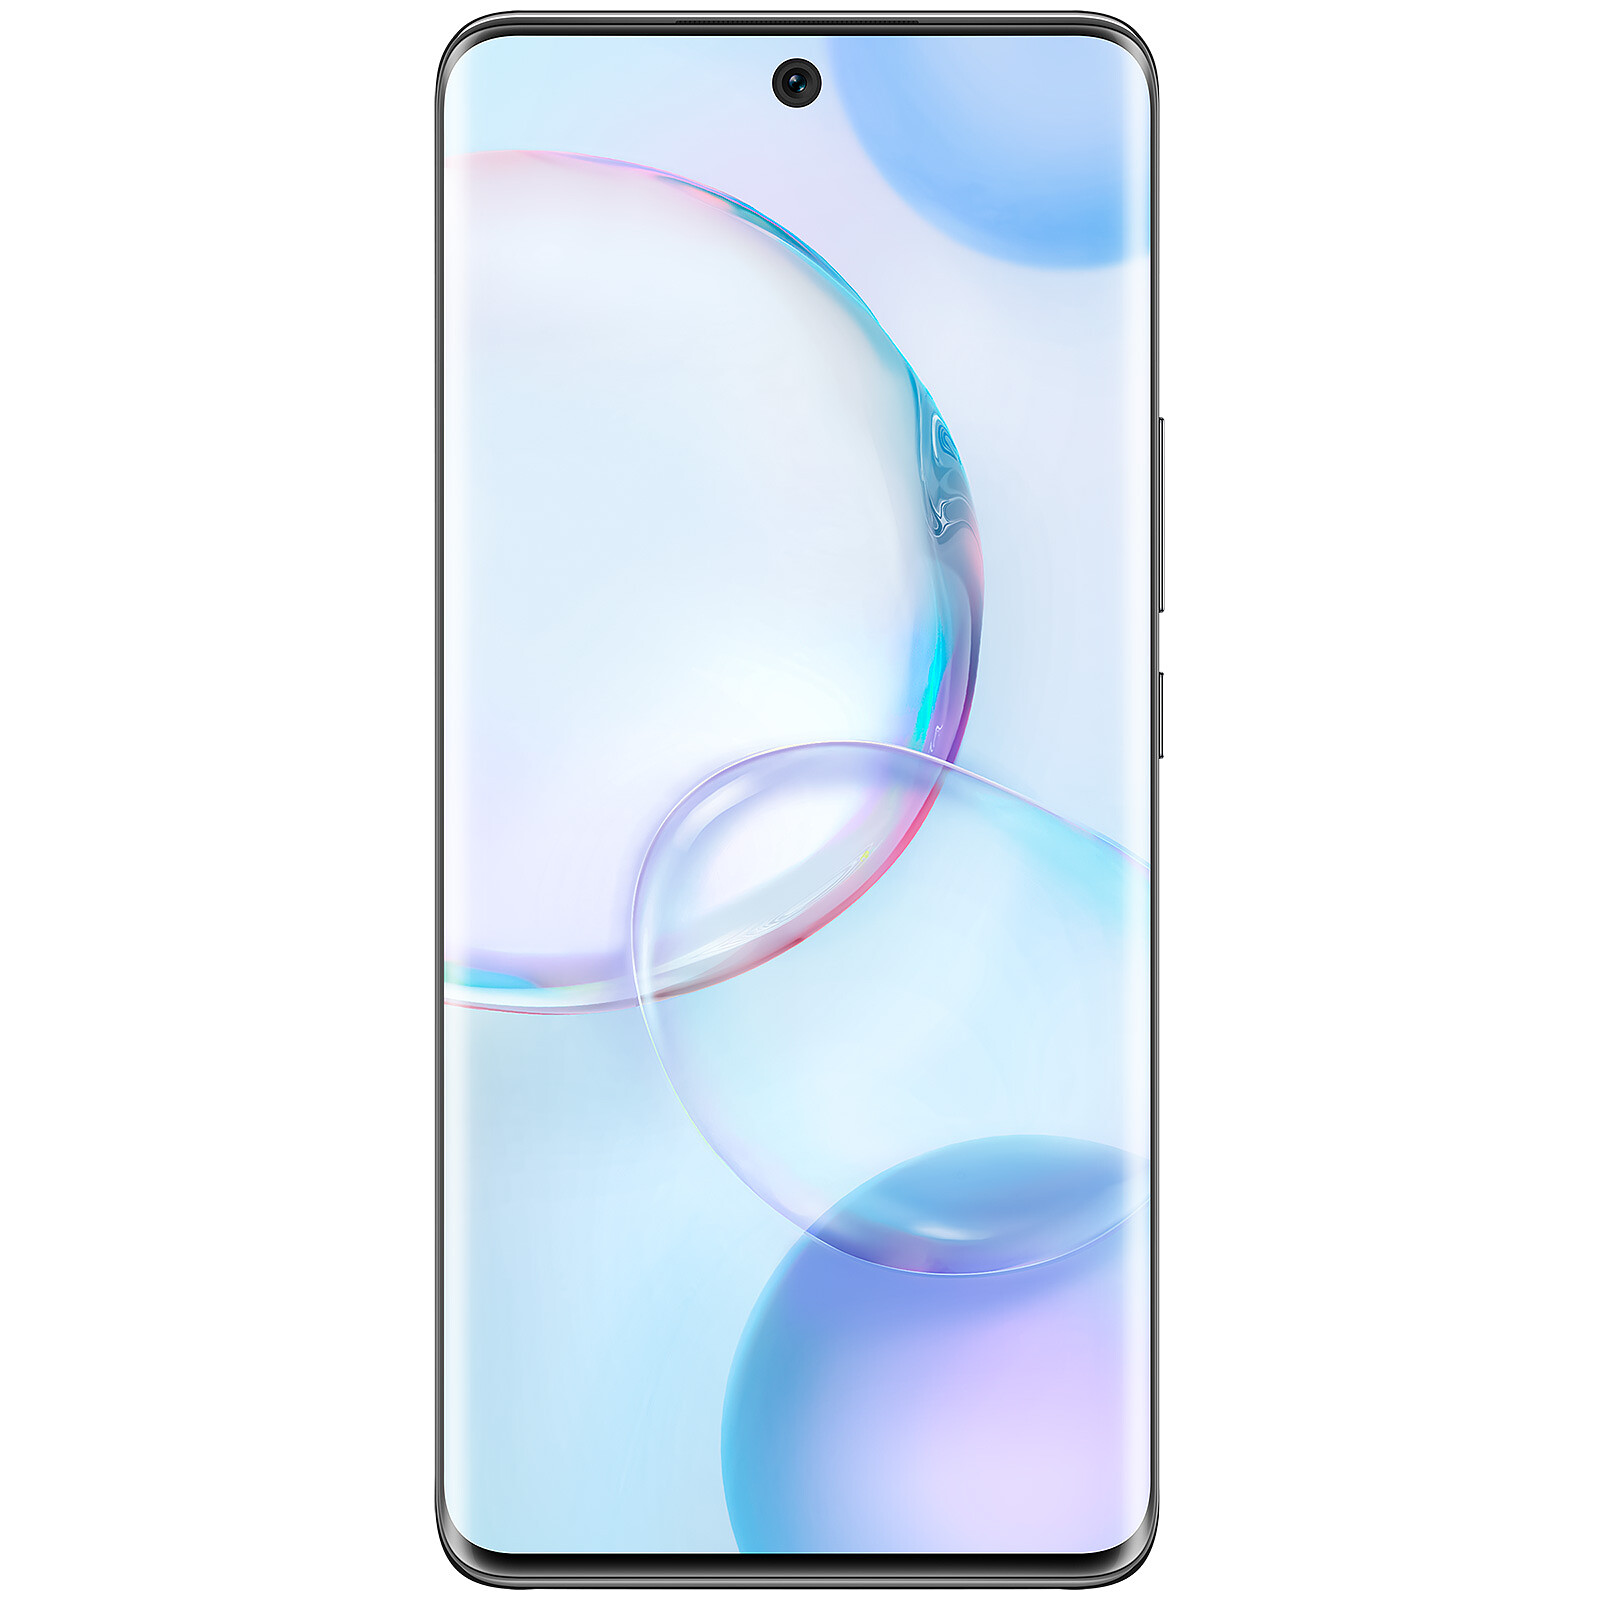 OPPO Find X5 5G Black - Mobile phone & smartphone - LDLC 3-year